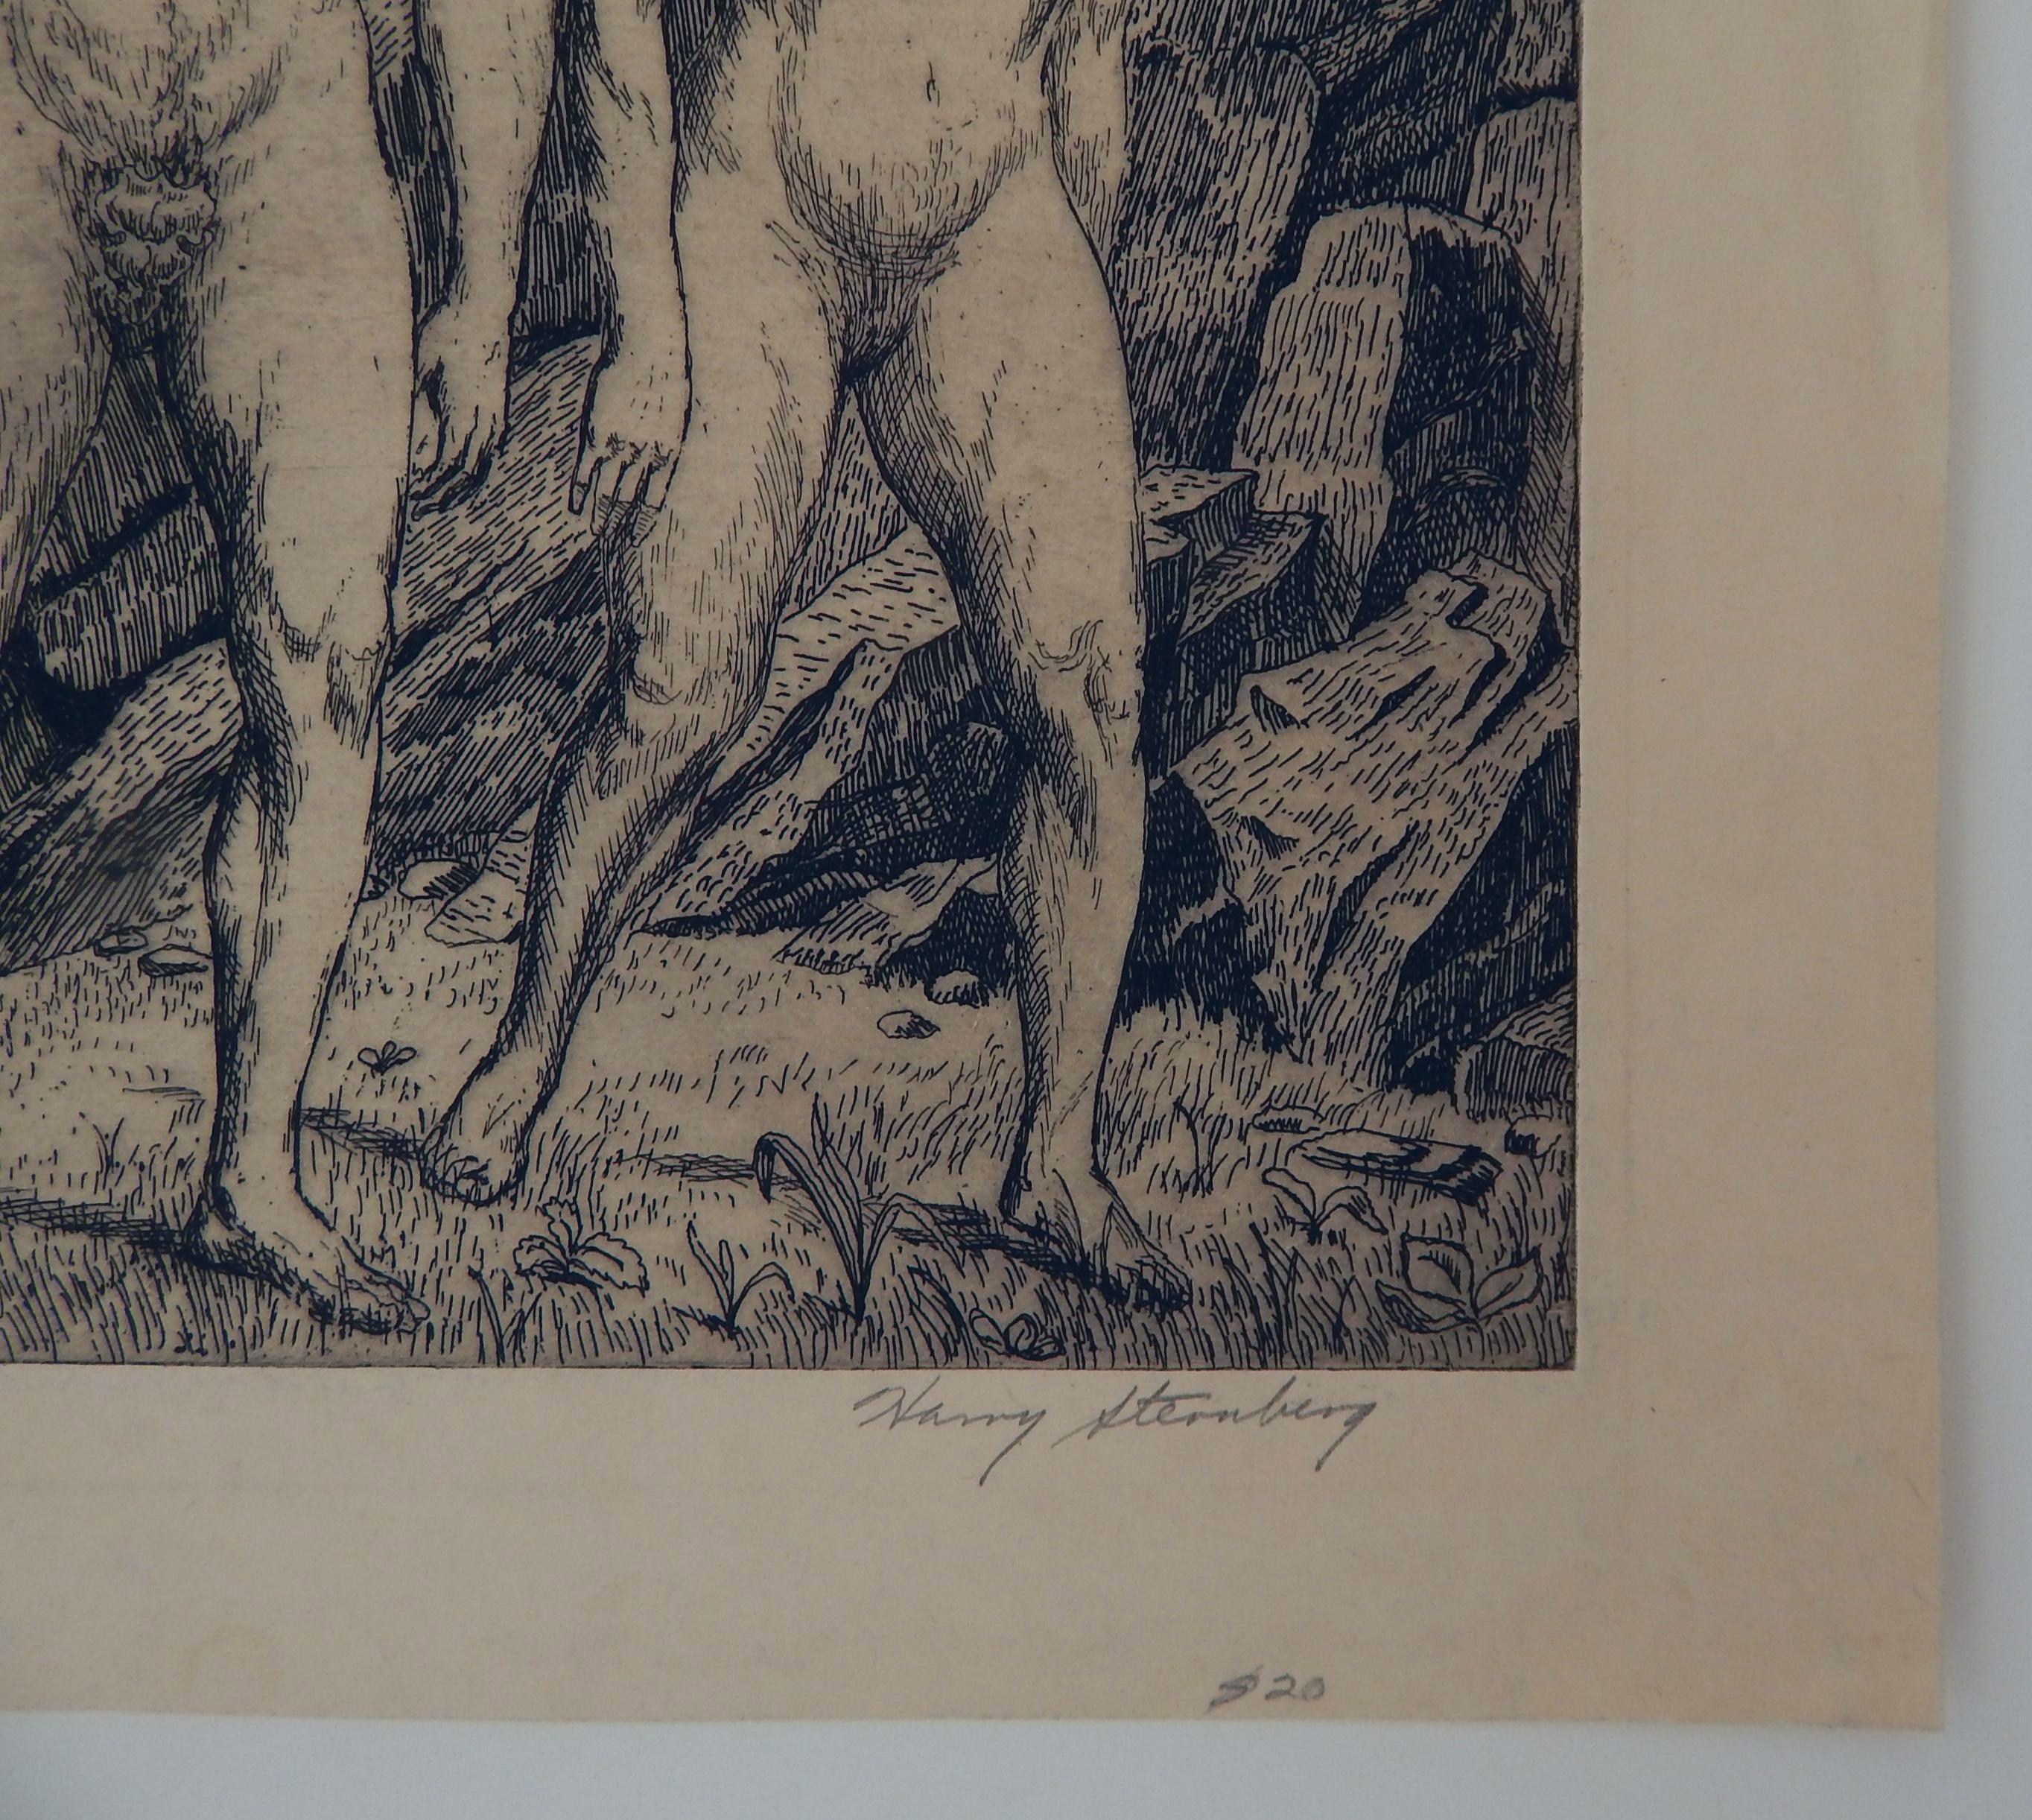 Harry Sternberg Pencil Signed Etching, 1931, New York City “Nudes in Landscape